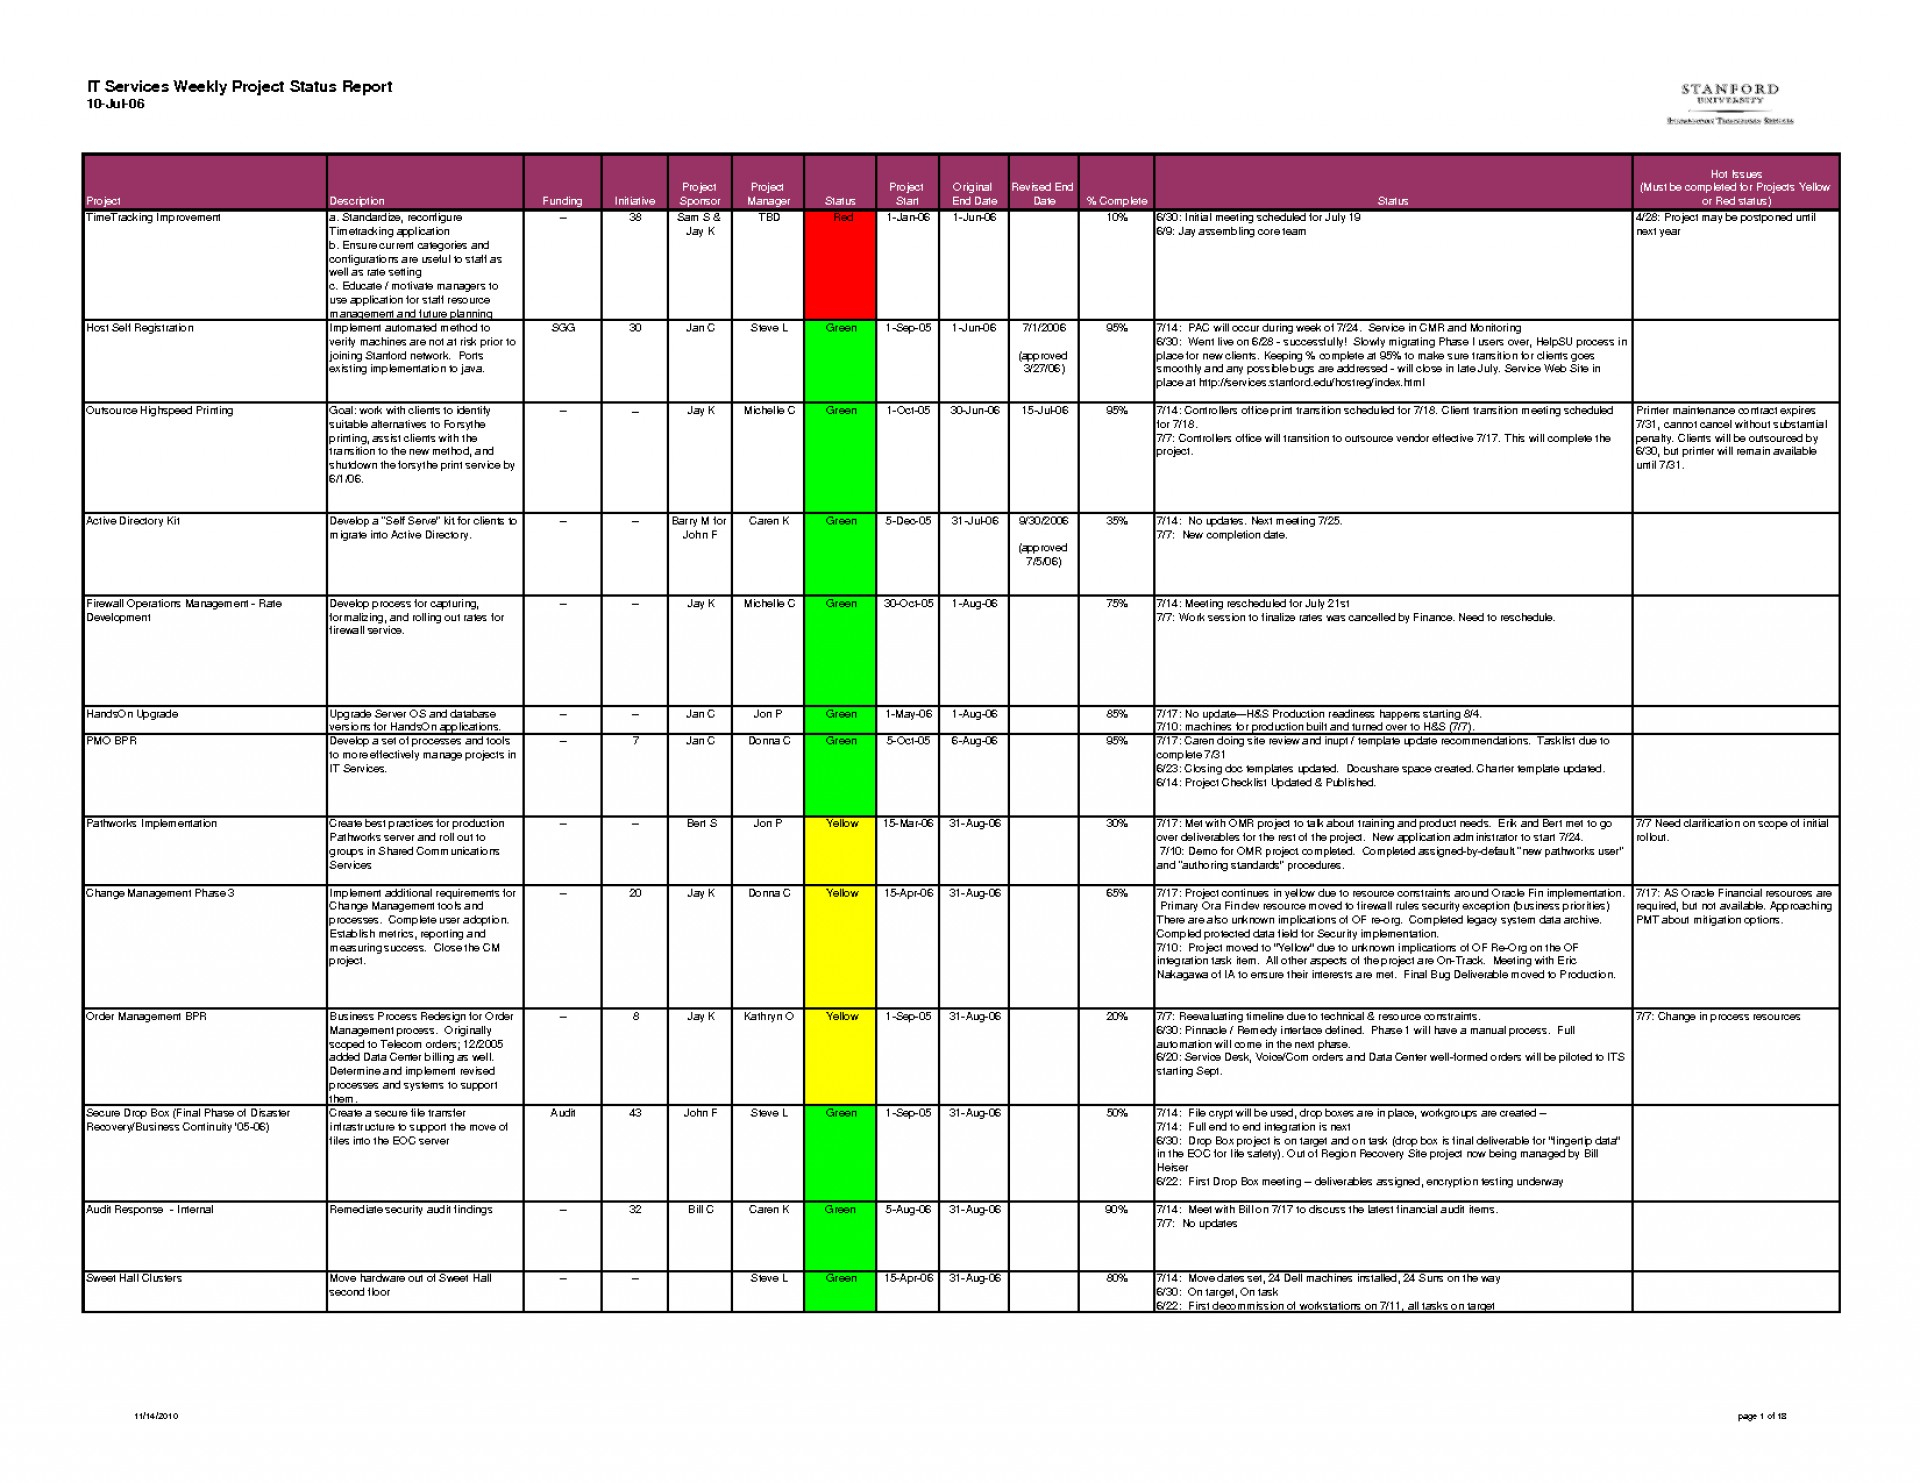 005 Status Report Template Weekly Excel Astounding Ideas Intended For Project Weekly Status Report Template Excel